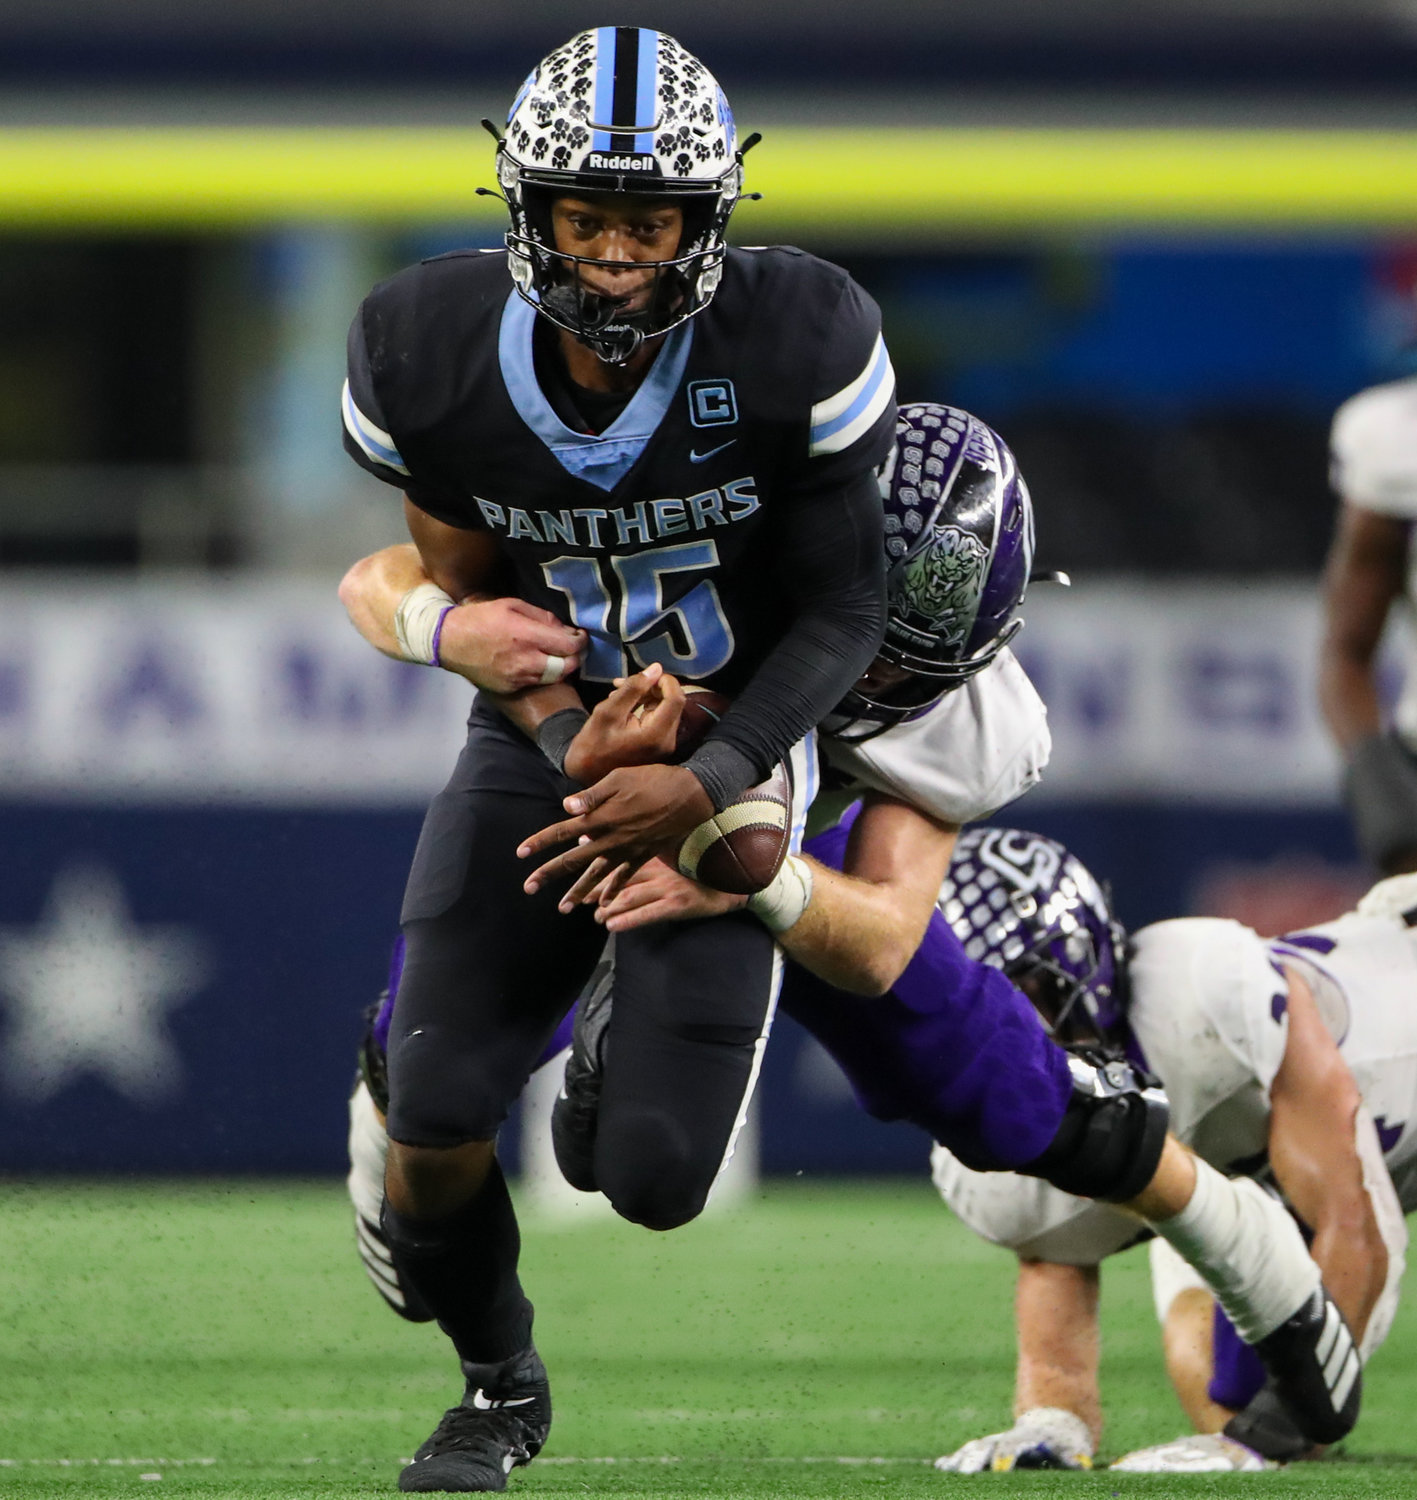 Paetow Panthers quarterback C.J. Dumas Jr. (15) nearly loses control of the ball on a carry during the Class 5A Division I state football championship game between Paetow and College Station on December 17, 2021 in Arlington, Texas.